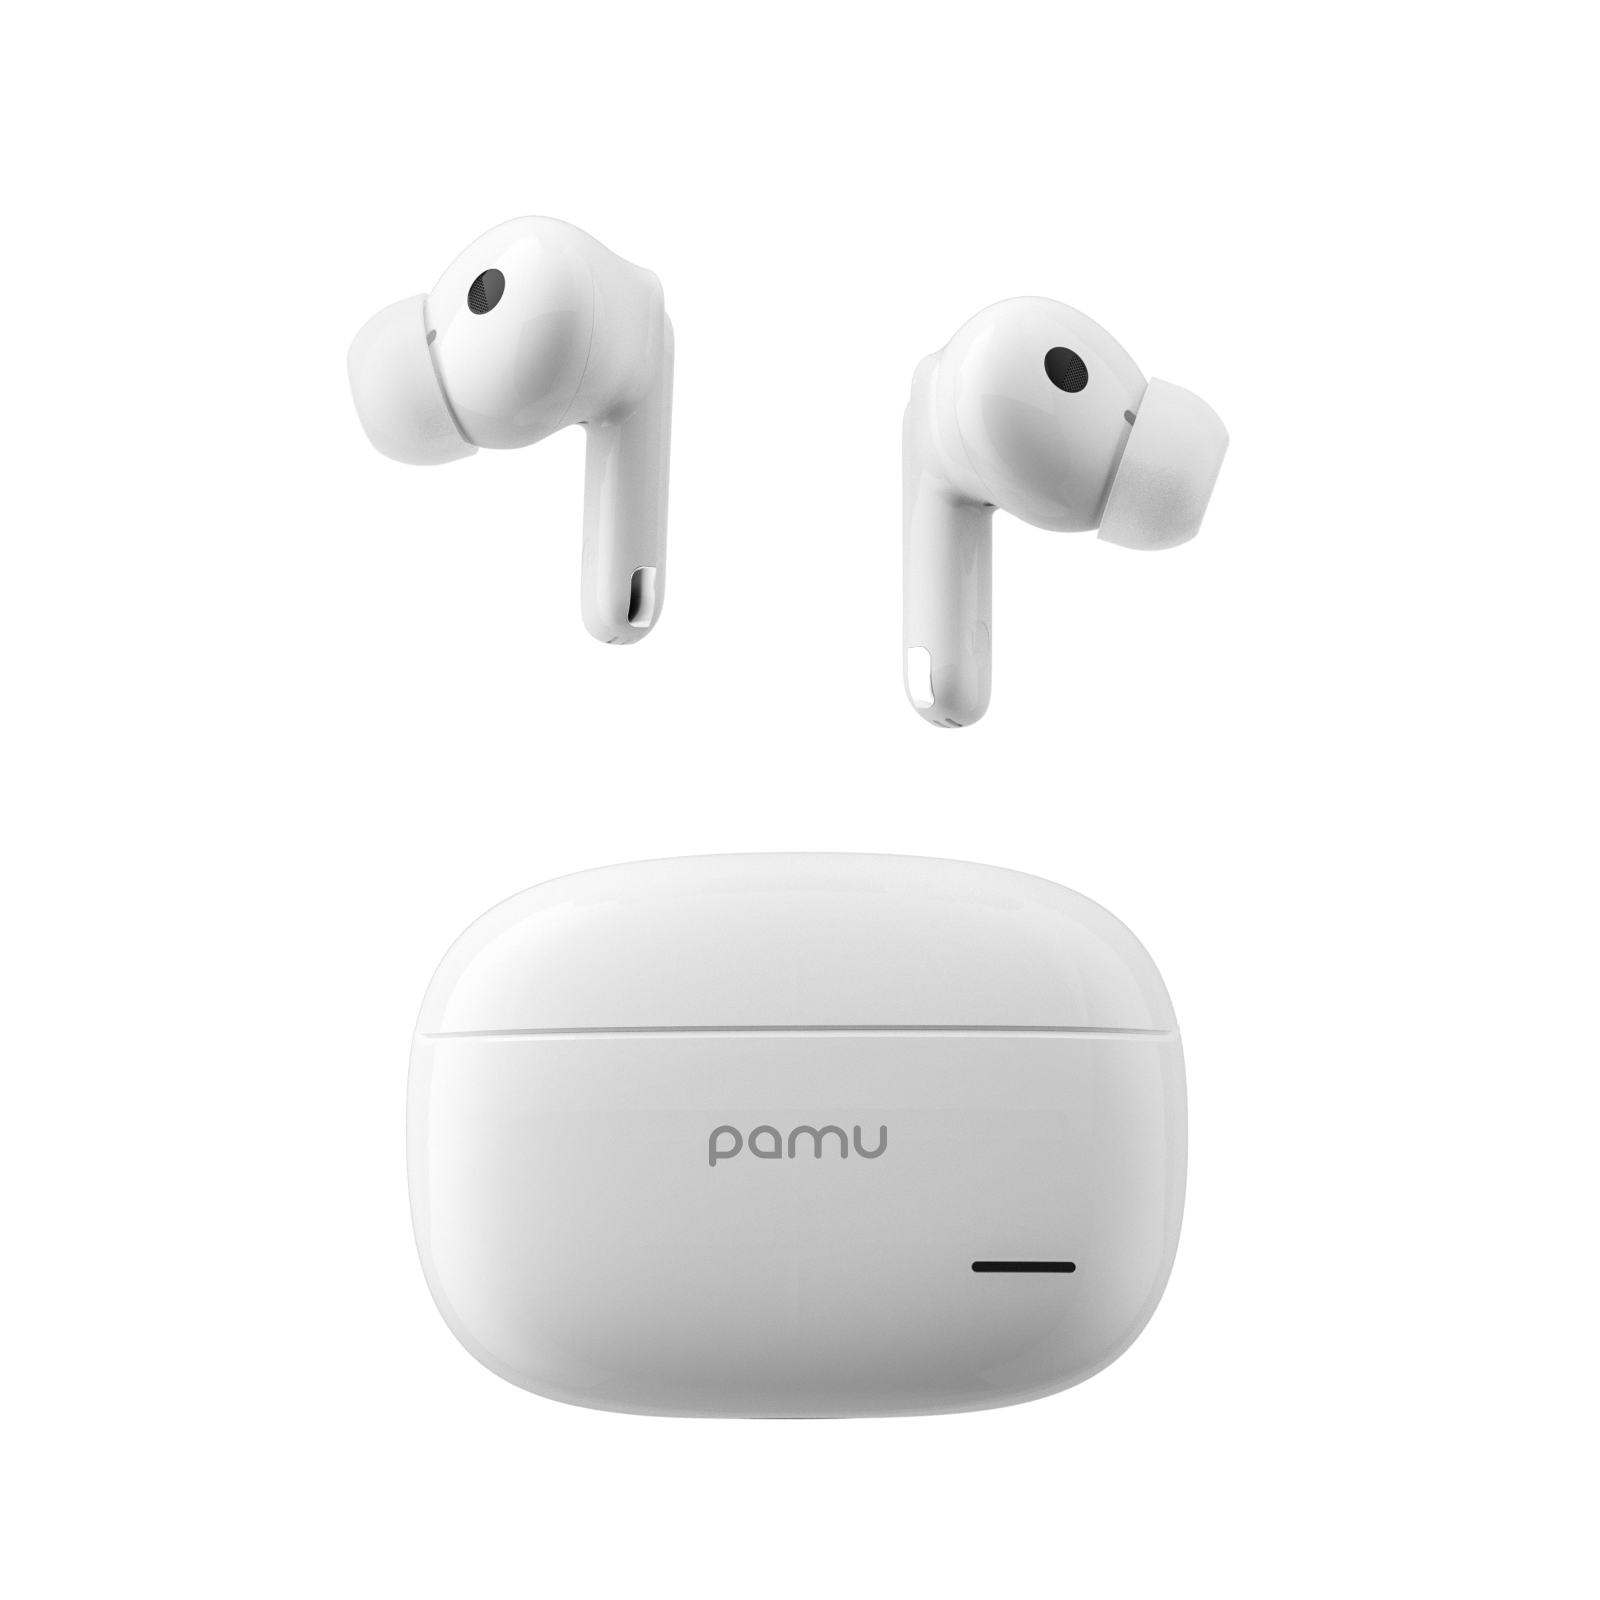 Pamu S29 Active Noise Canceling True Wireless Stereo Earbuds